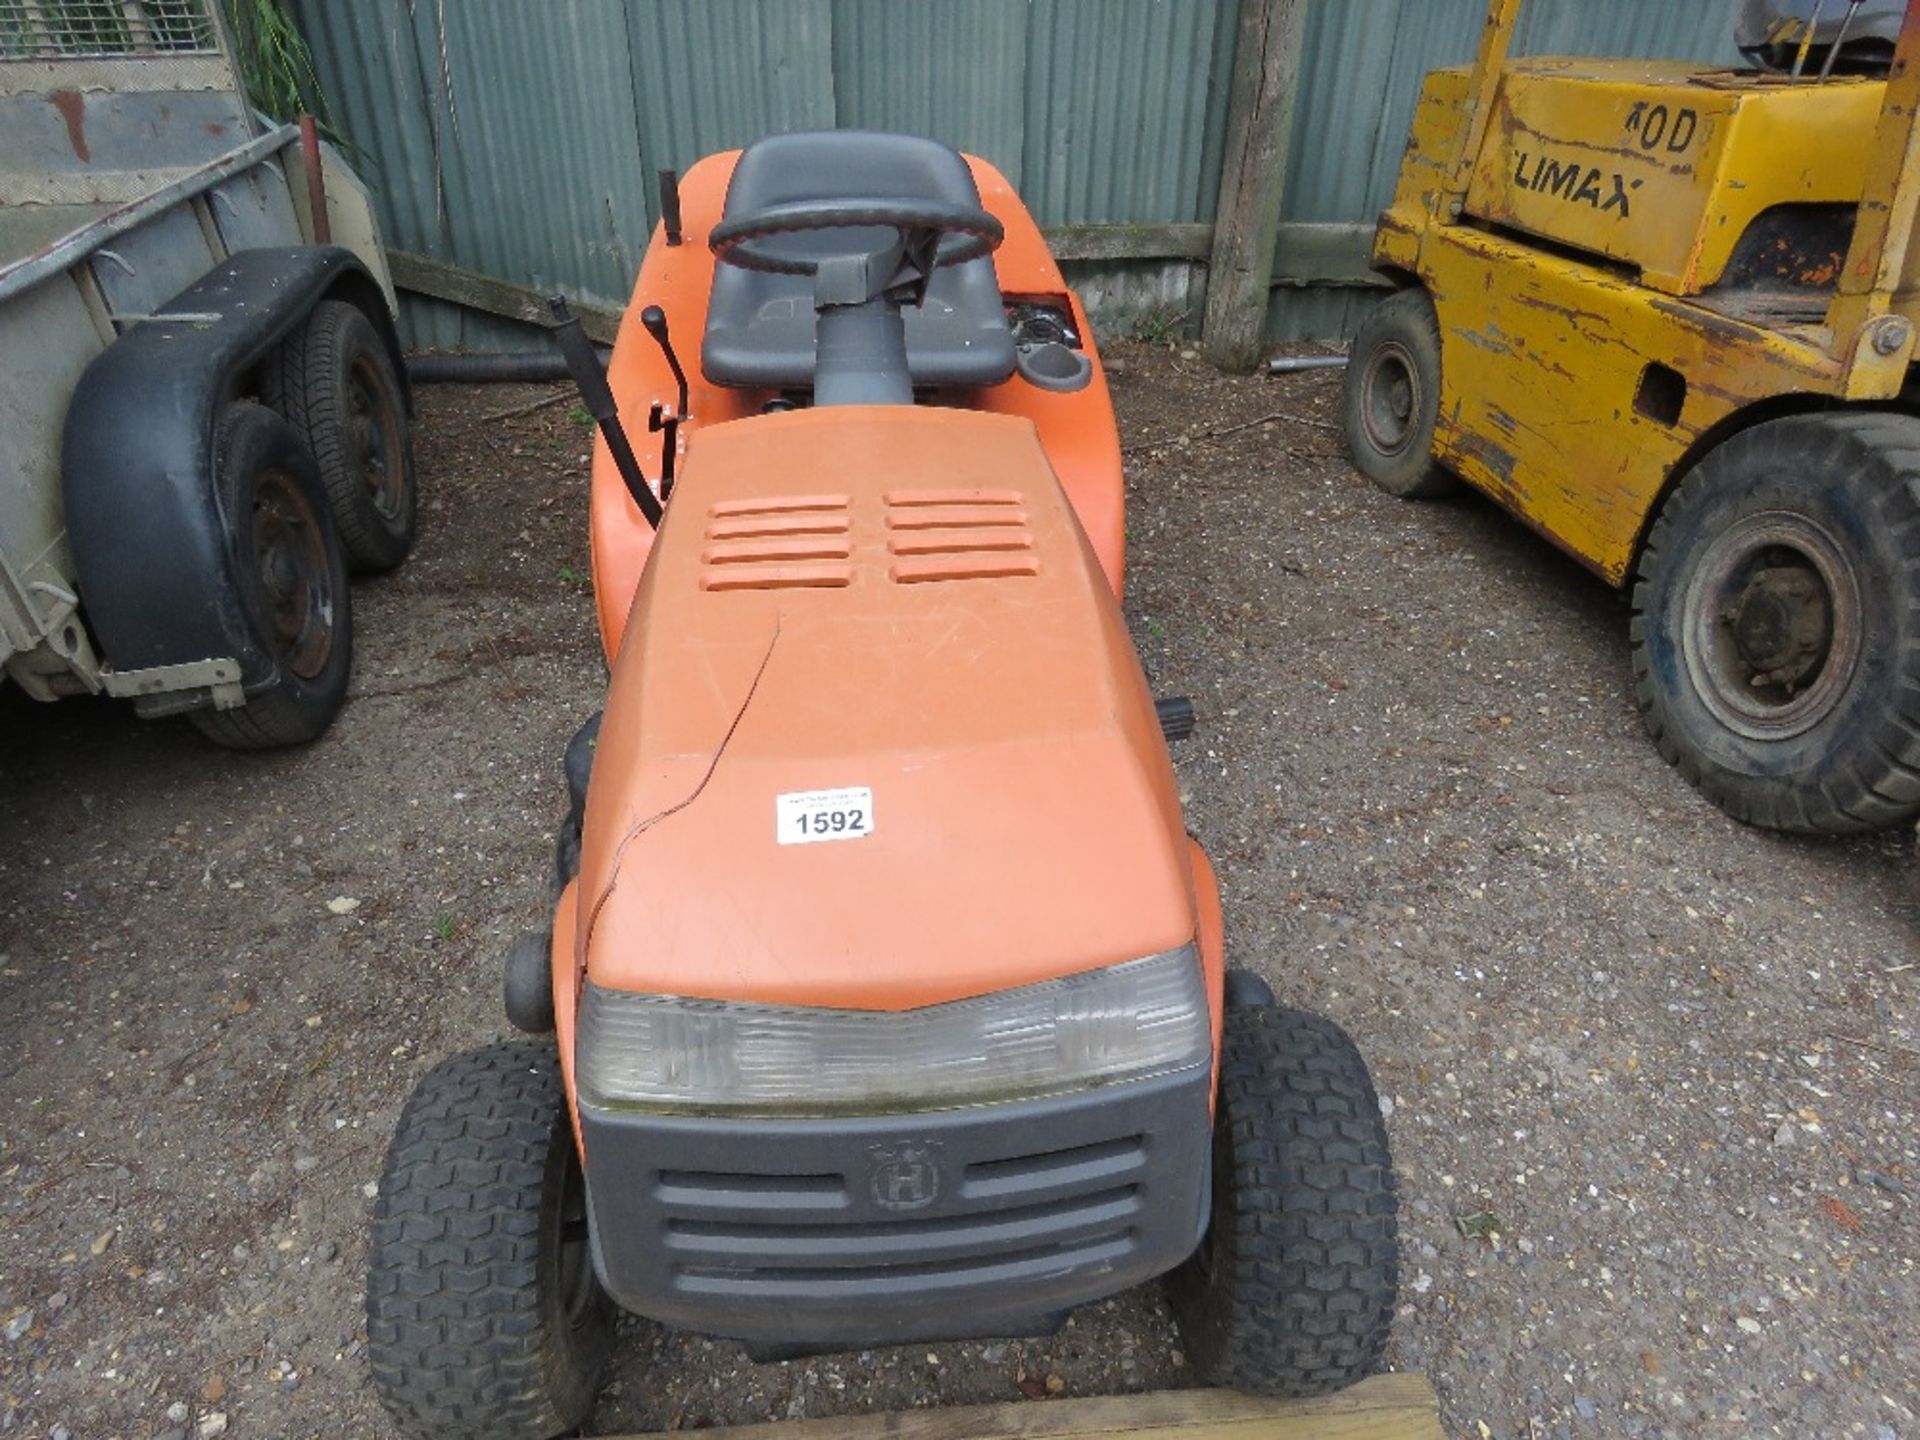 HUSQVARNA CT130 RIDE ON MOWER WITH COLLECTOR. WHEN TESTED WAS SEEN TO DRIVE, STEER, BRAKE AND MOWERS - Image 2 of 9